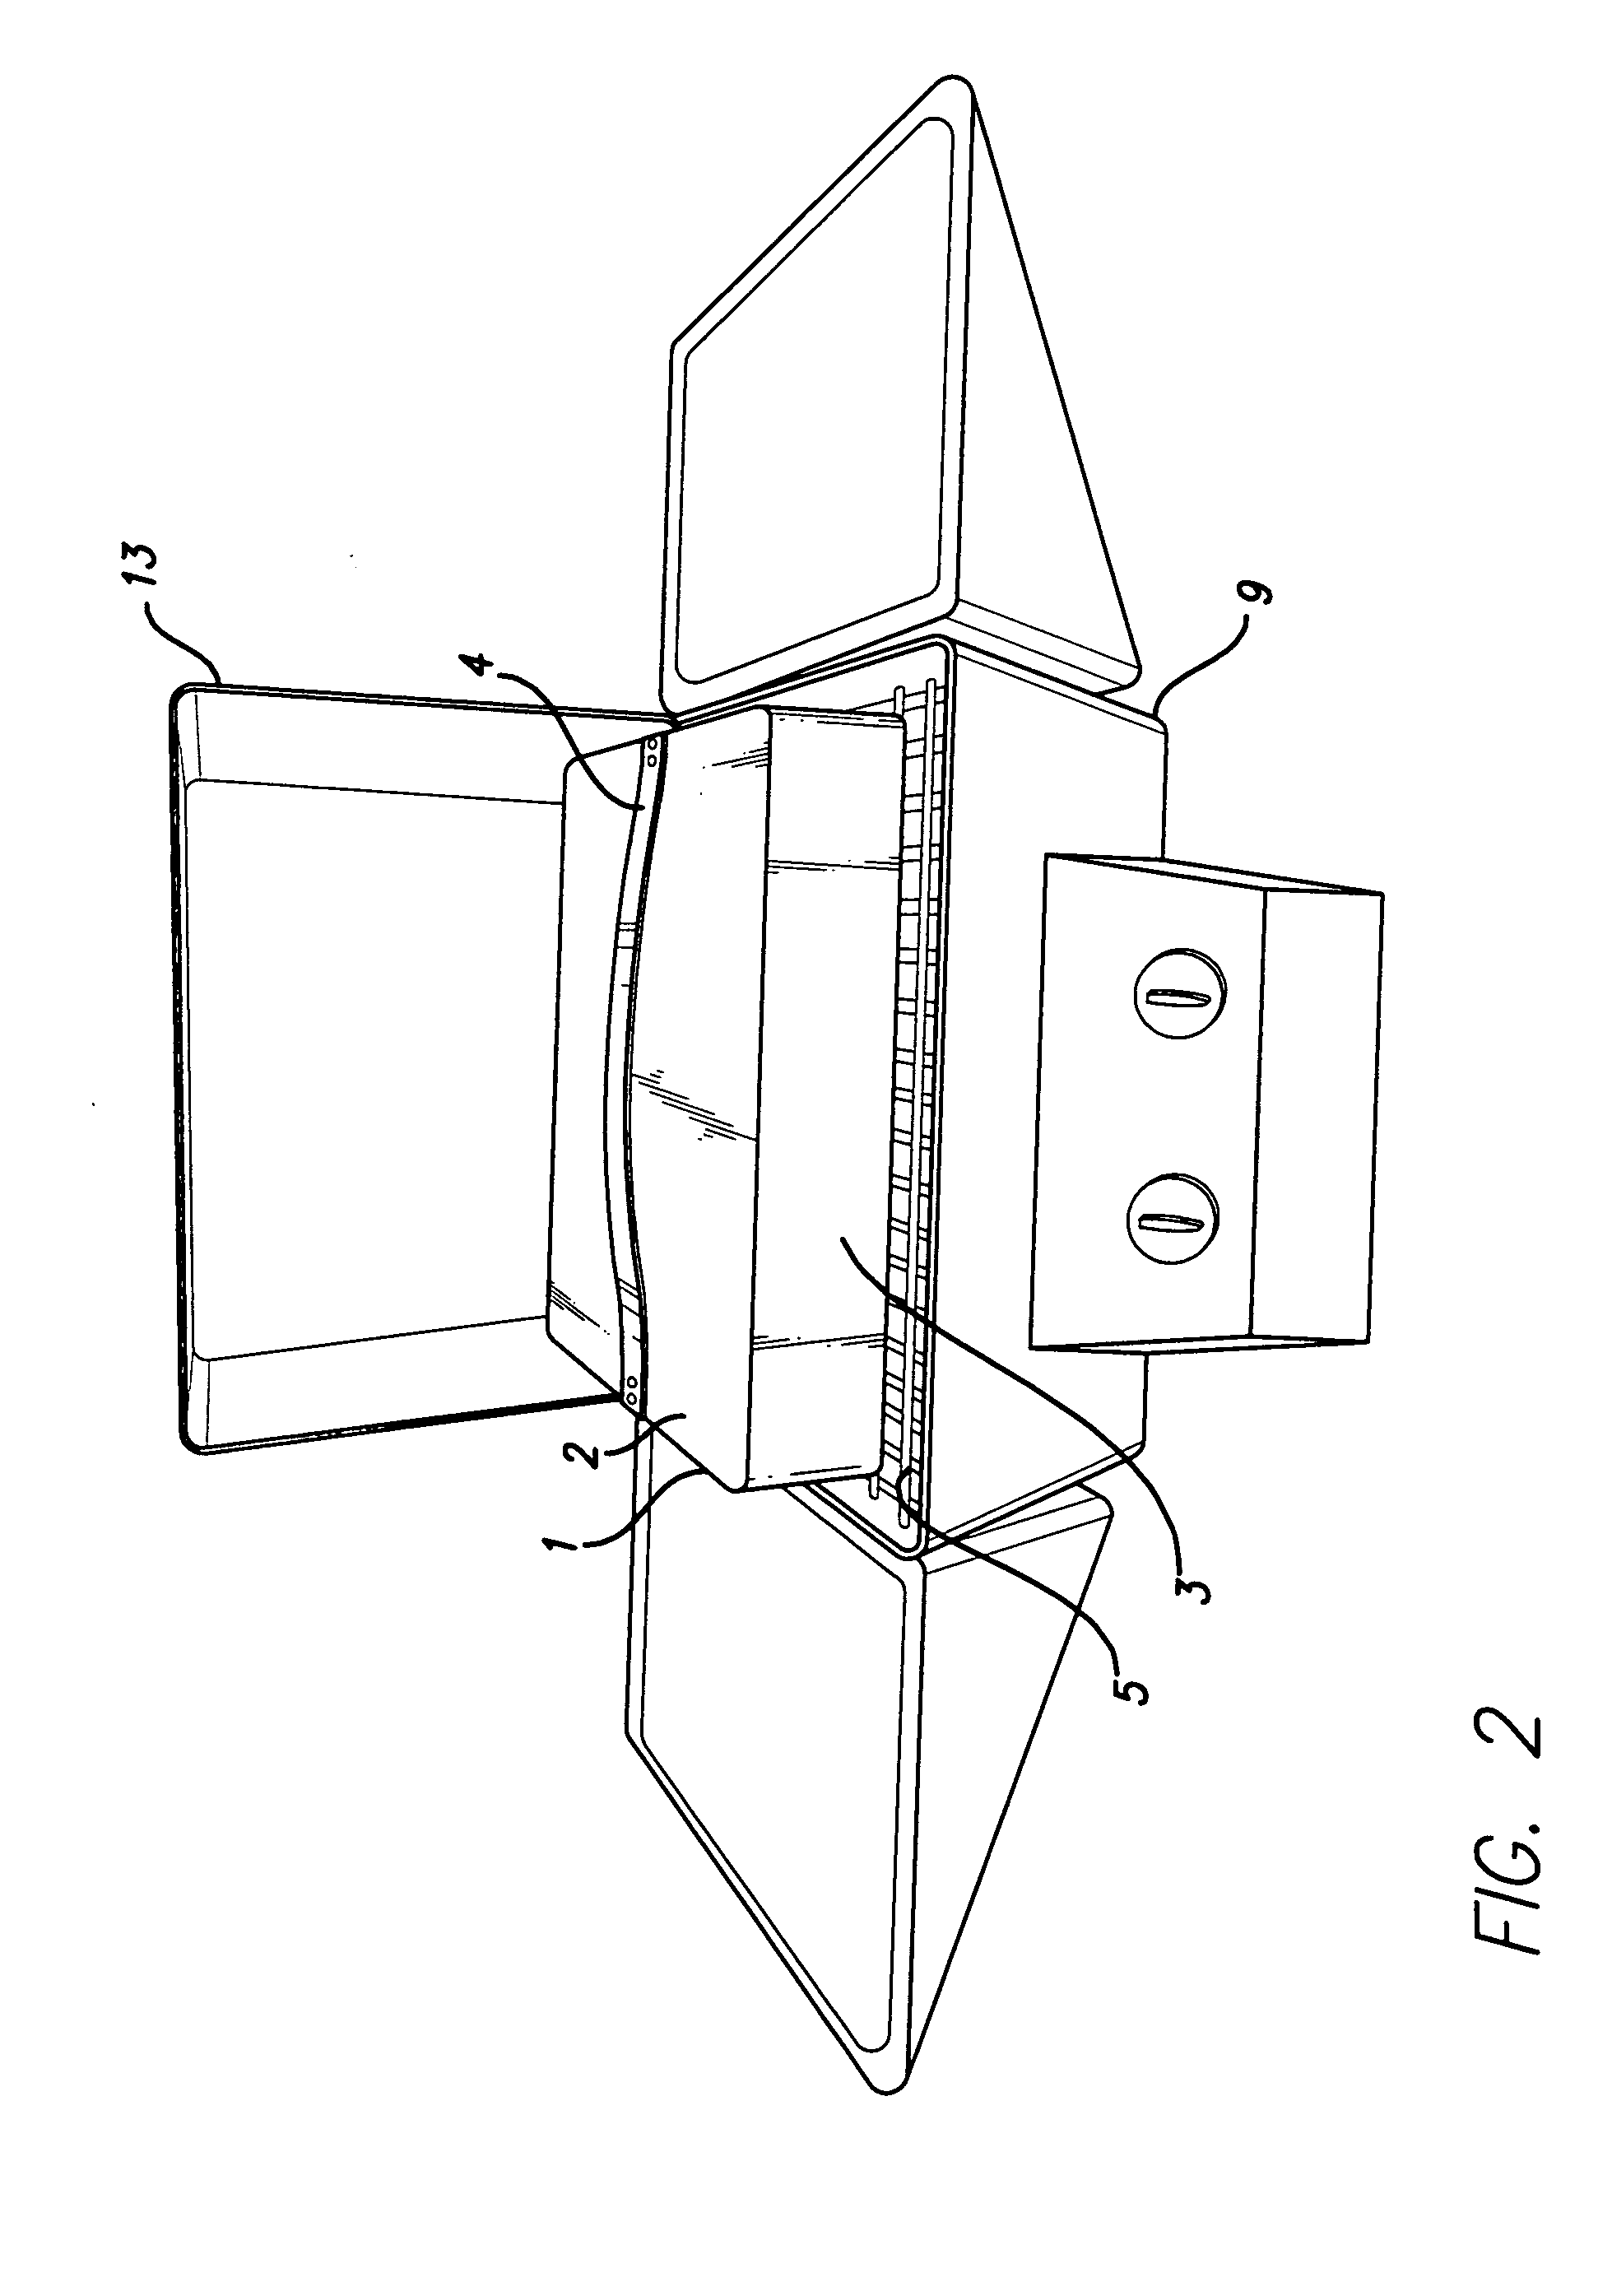 Insulated cover and method for cooking pizza and similar food items on a home gas or charcoal grill